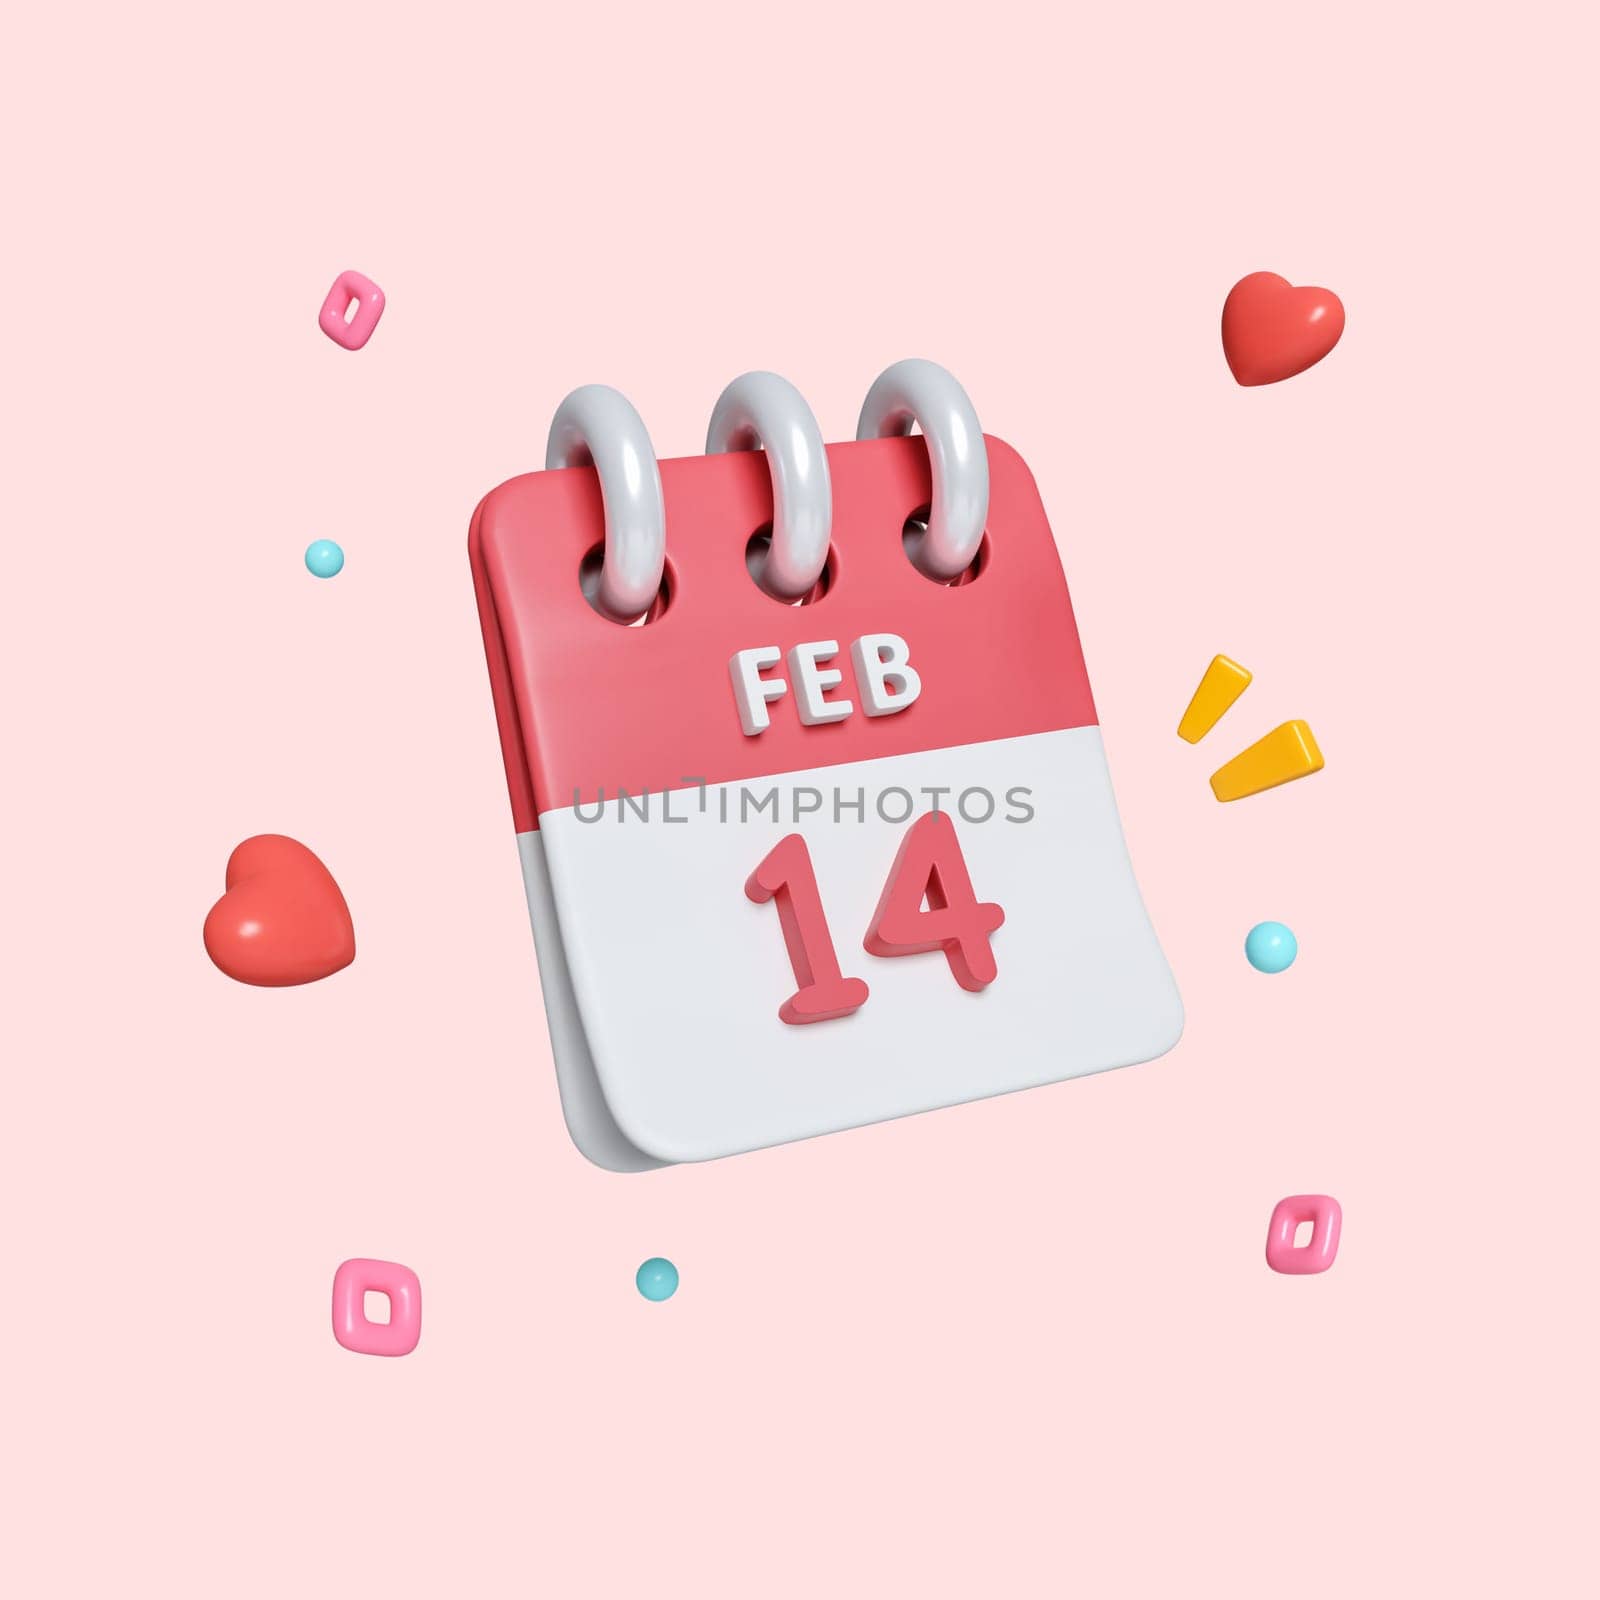 Calendar 14 February isolated on pastel pink background with clipping path. Happy Valentine's Day icon. 3d render illustration by meepiangraphic